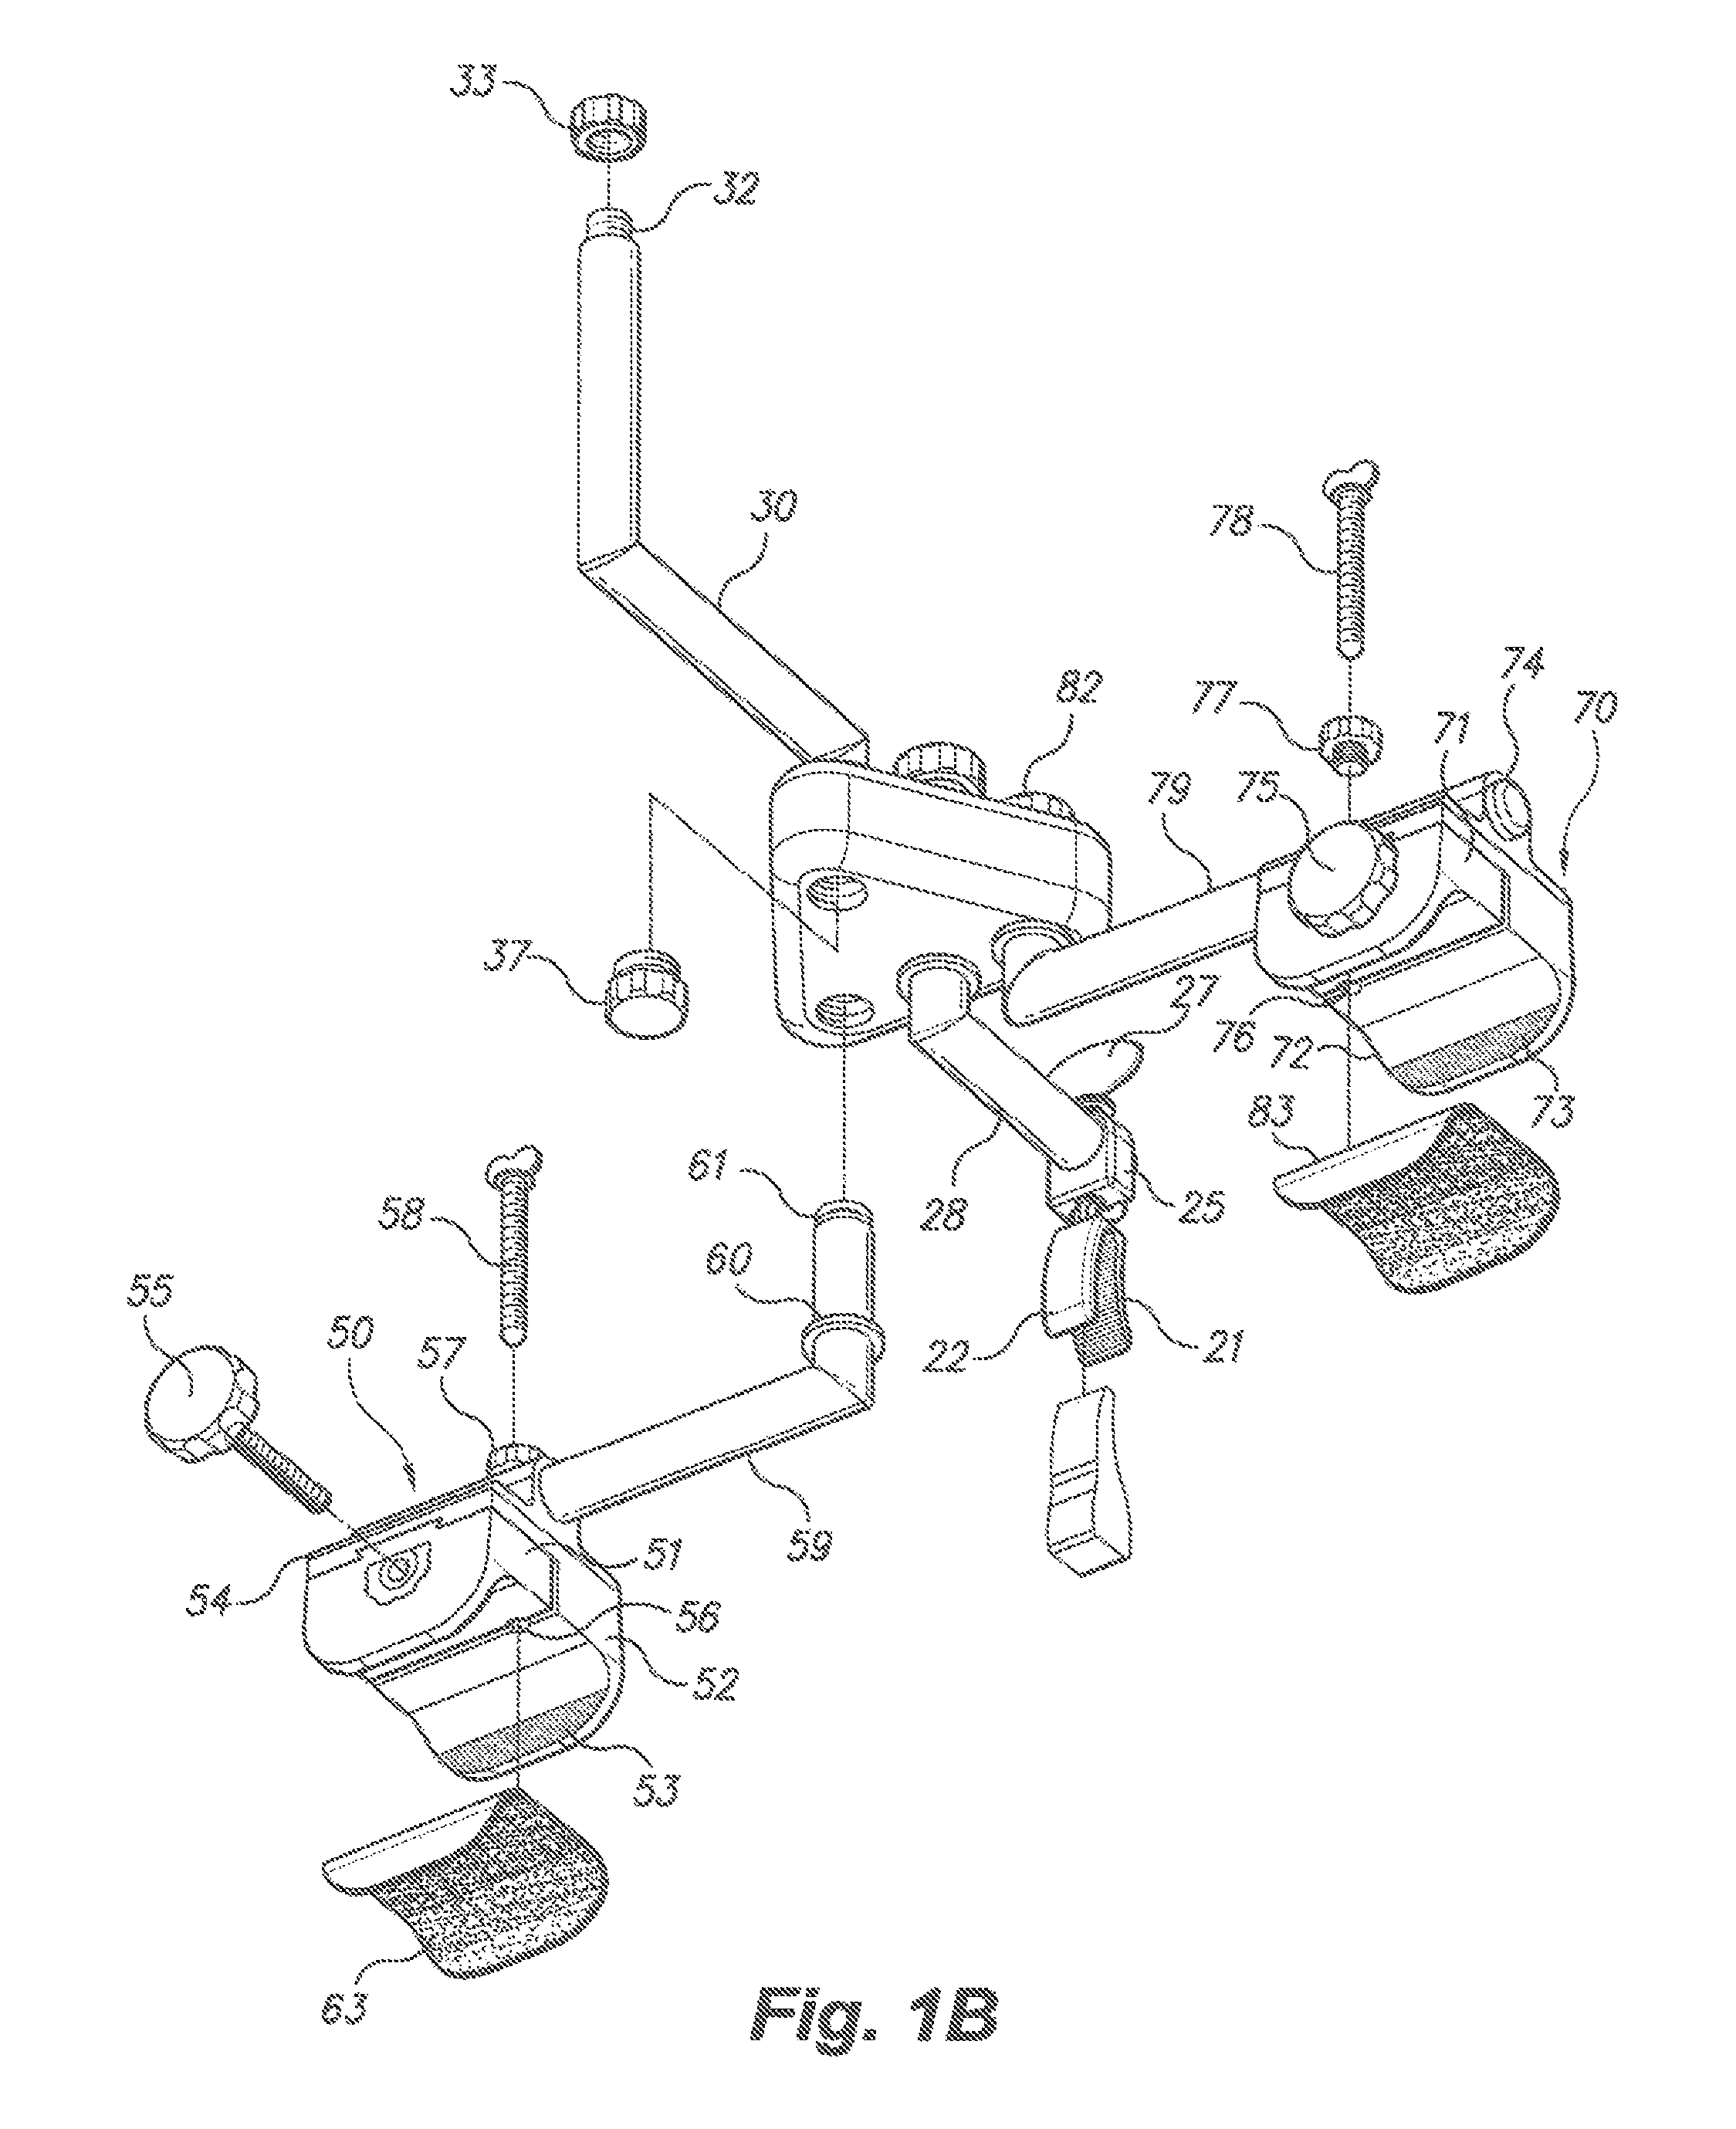 Dental prosthetic and restoration removal system and method